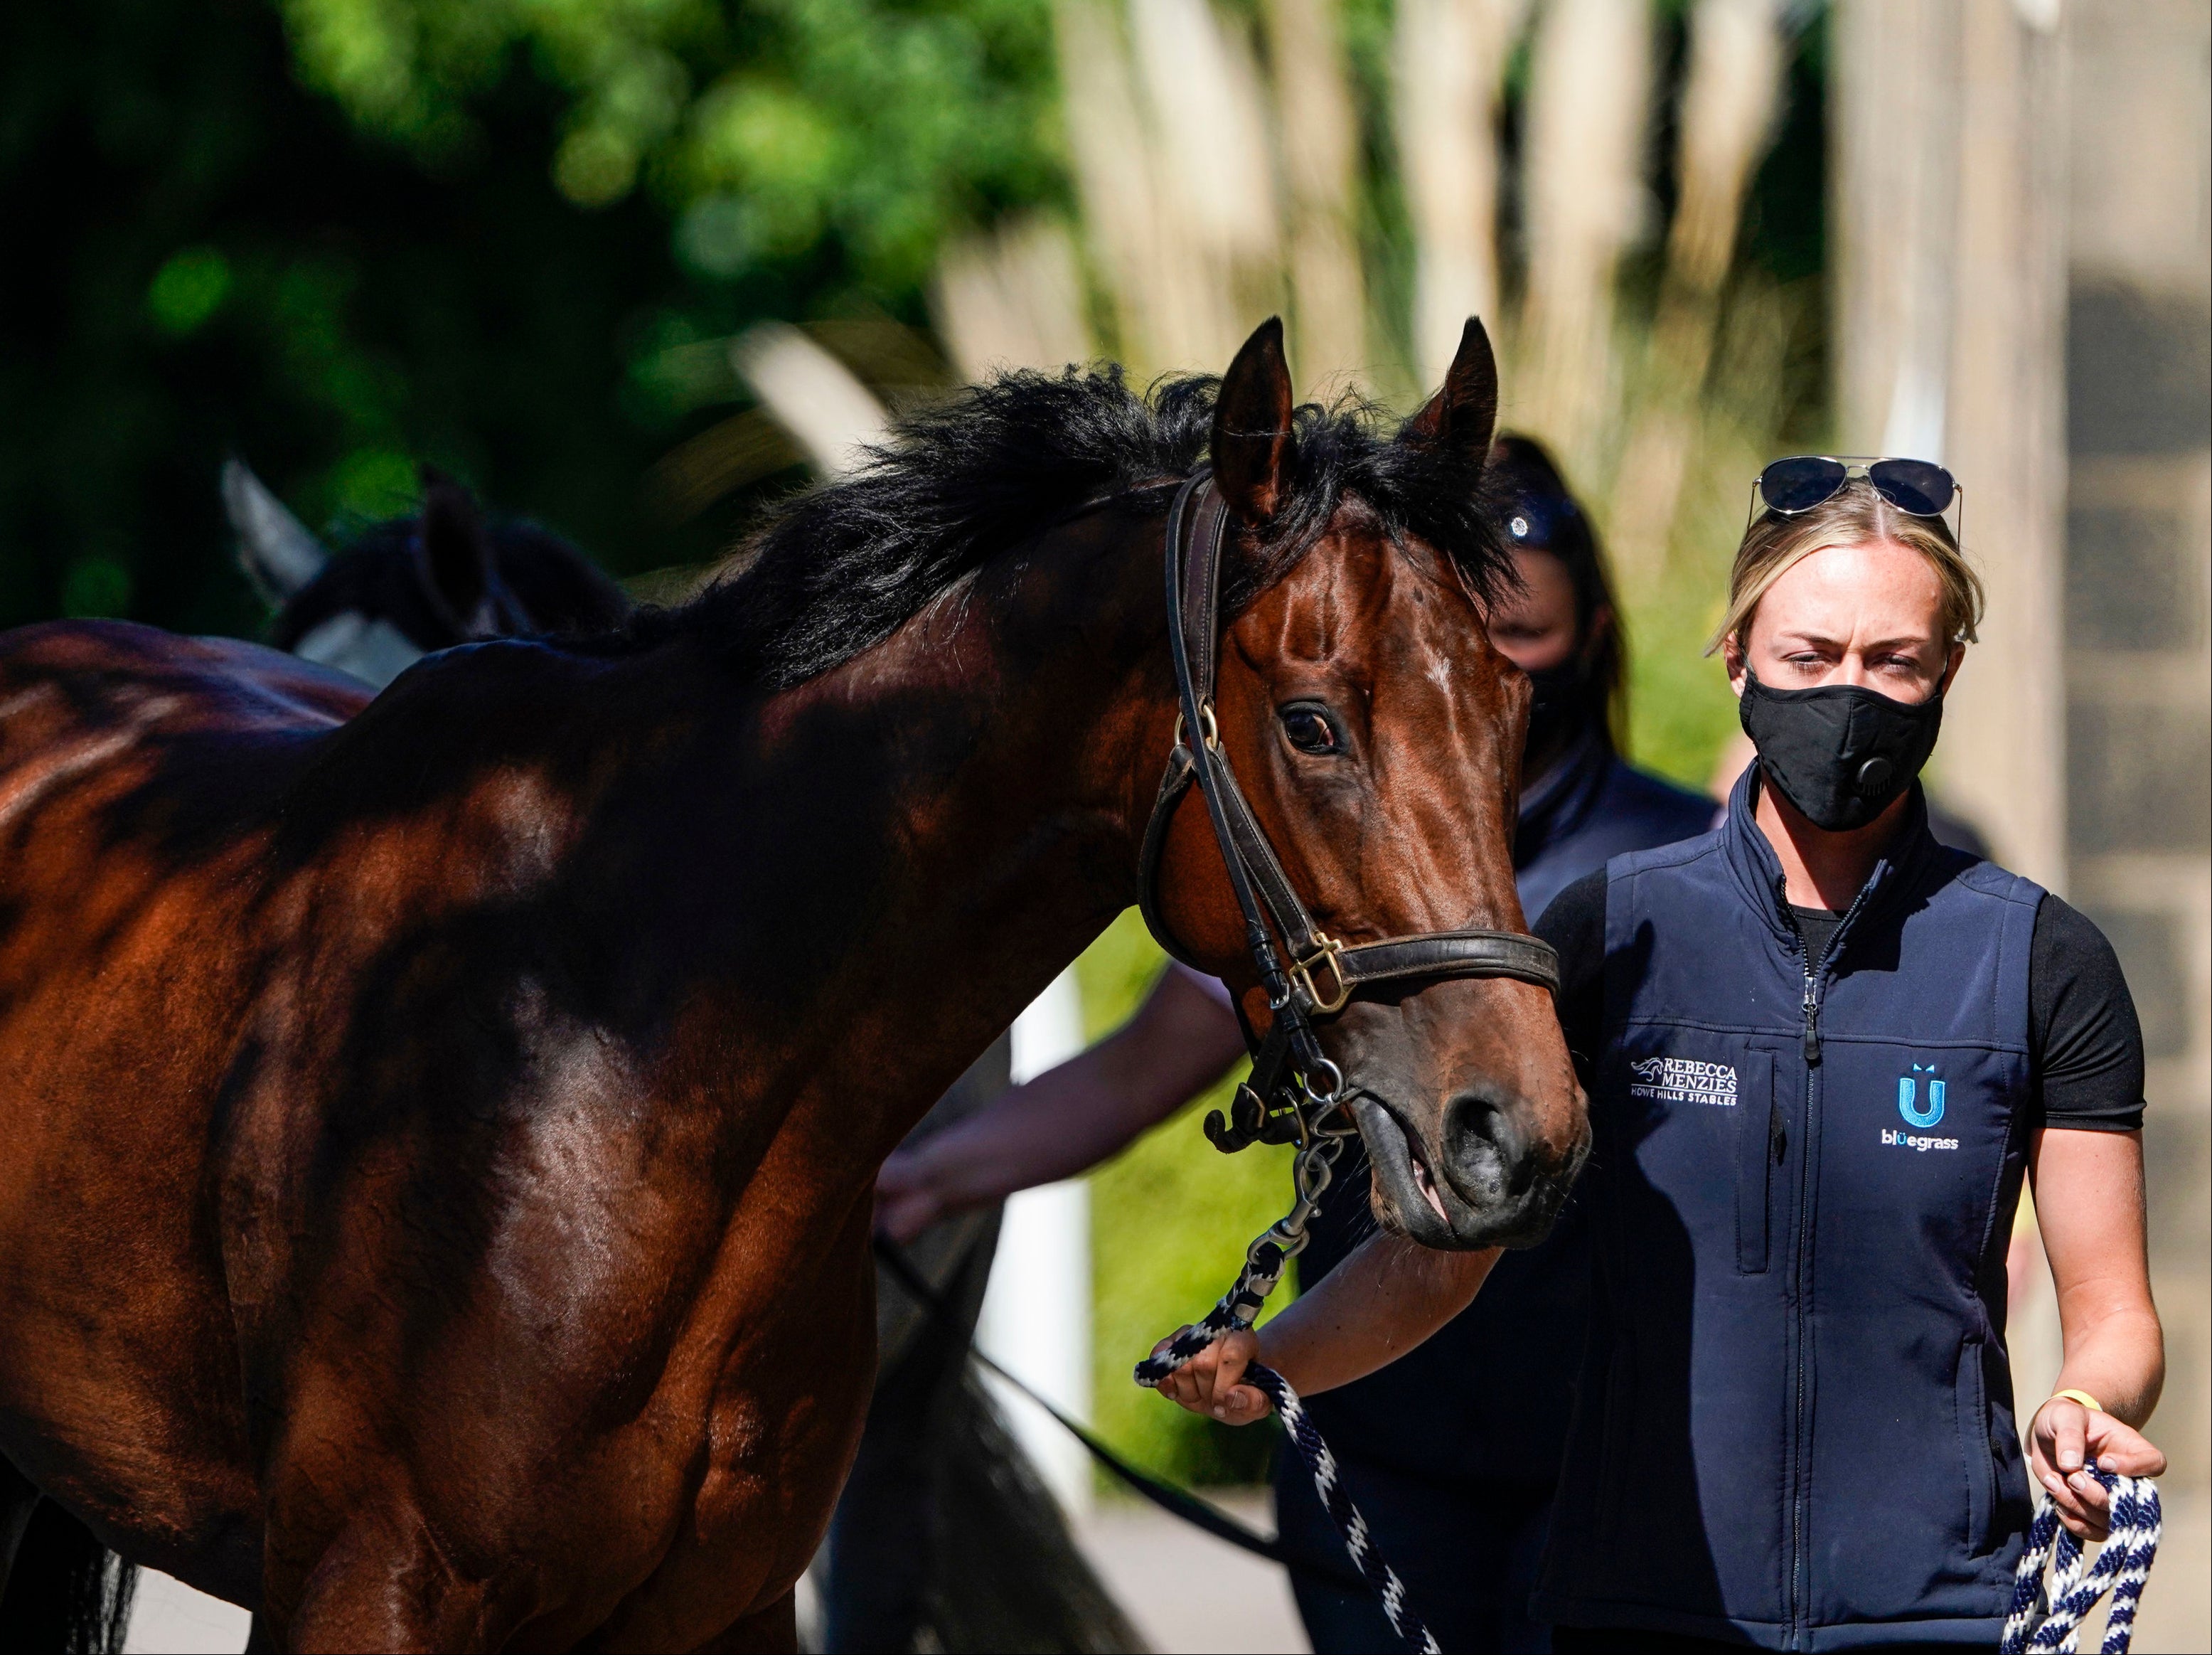 Freedom of information requests also revealed that 4,000 former racehorses were slaughtered in Britain and Ireland since the beginning of 2019